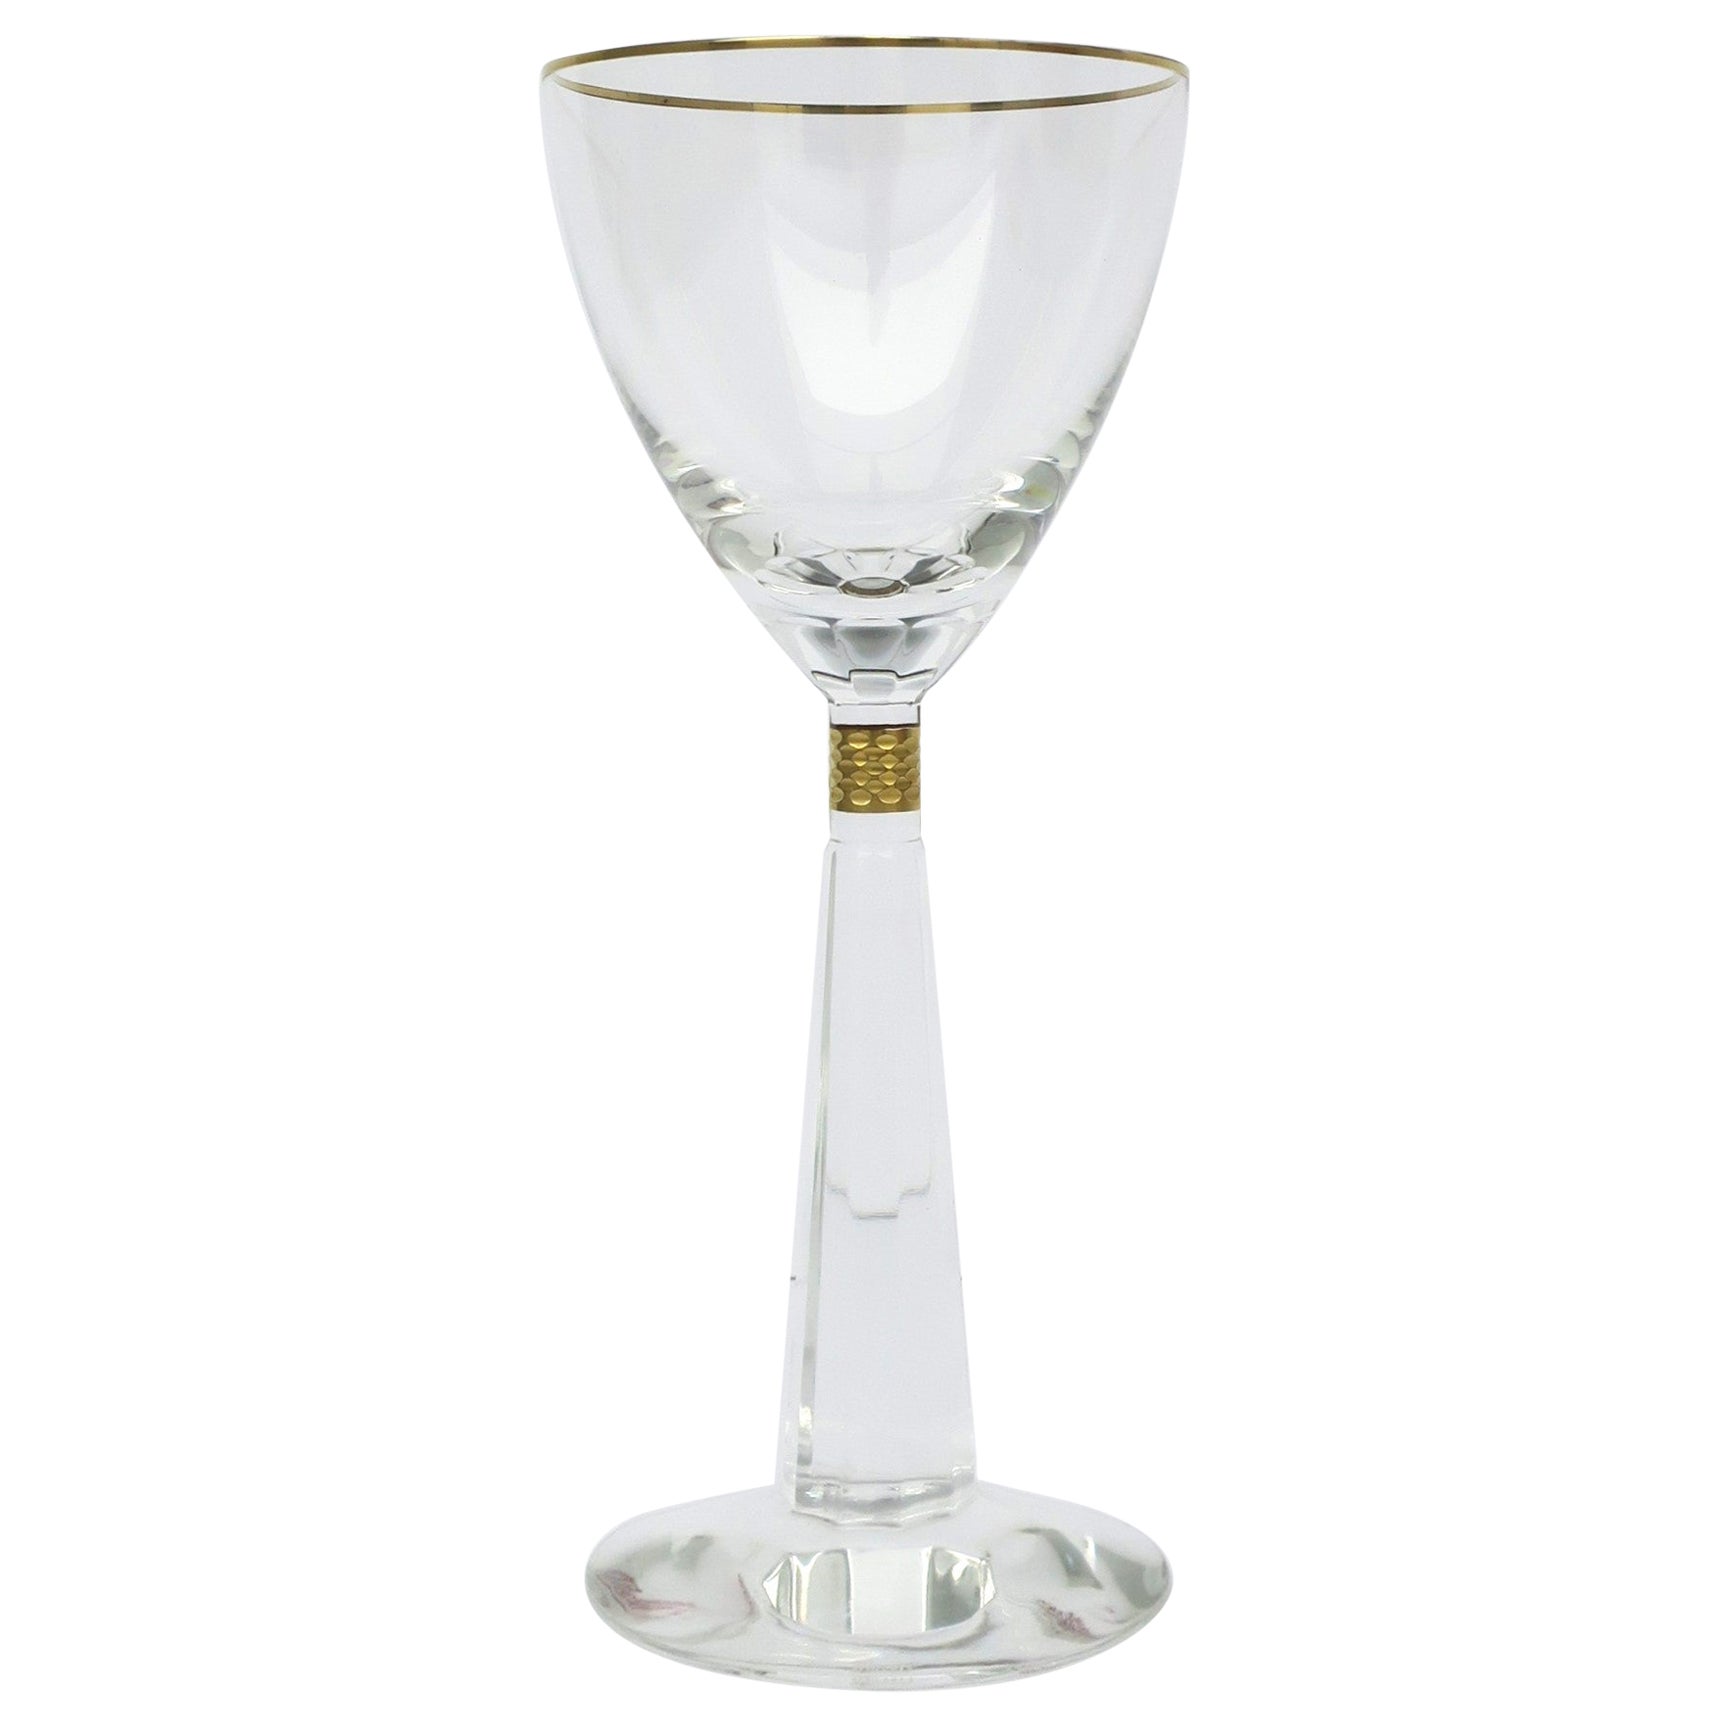 What is the difference between glass and crystal wine glasses?